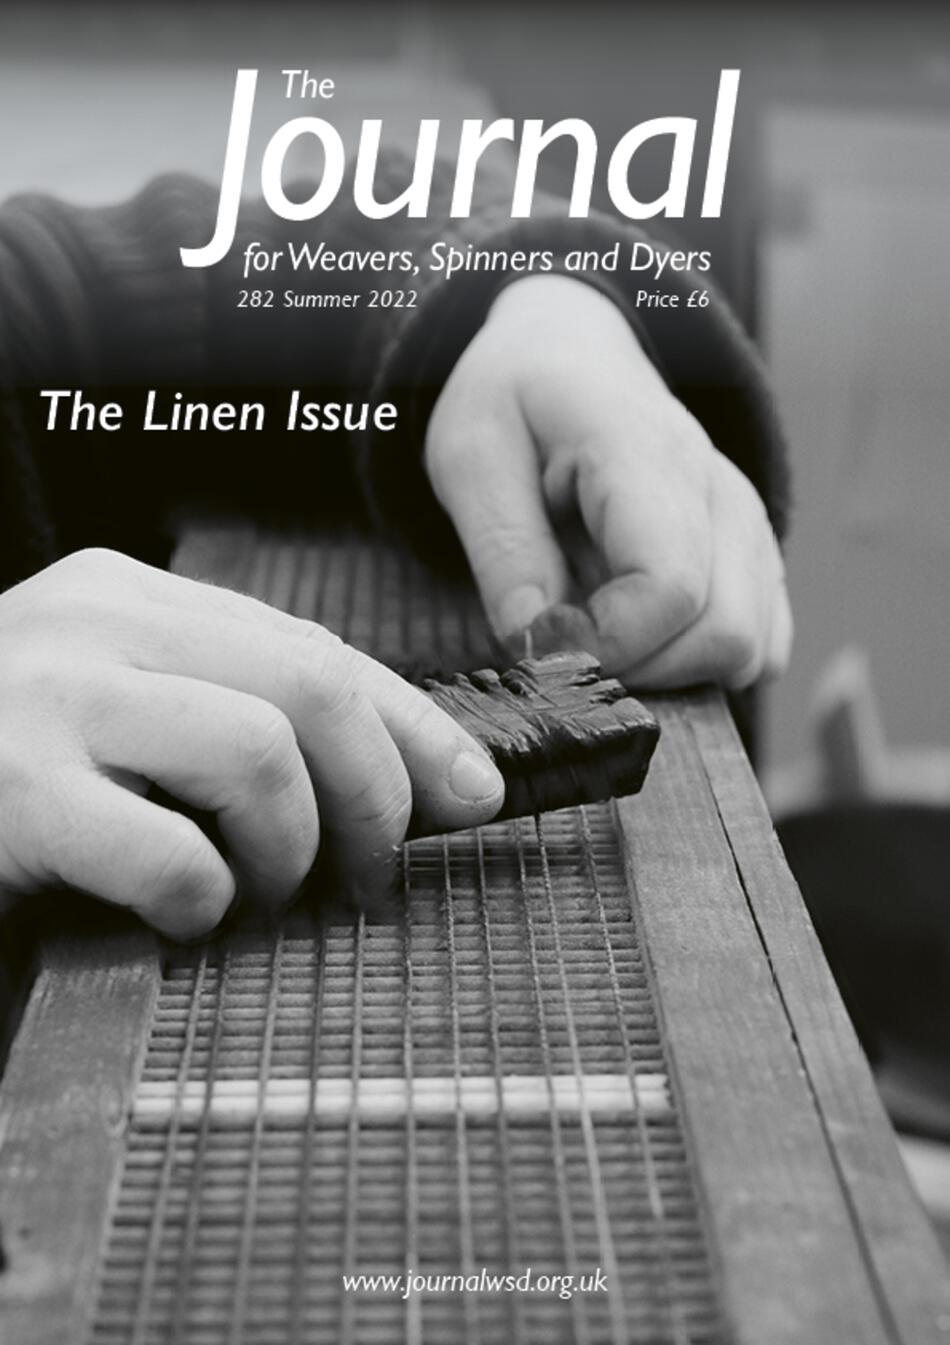 Weaving Magazines The Journal For Weavers Spinners and Dyers  UK  Issue 282 Summer 2022  The Linen Issue